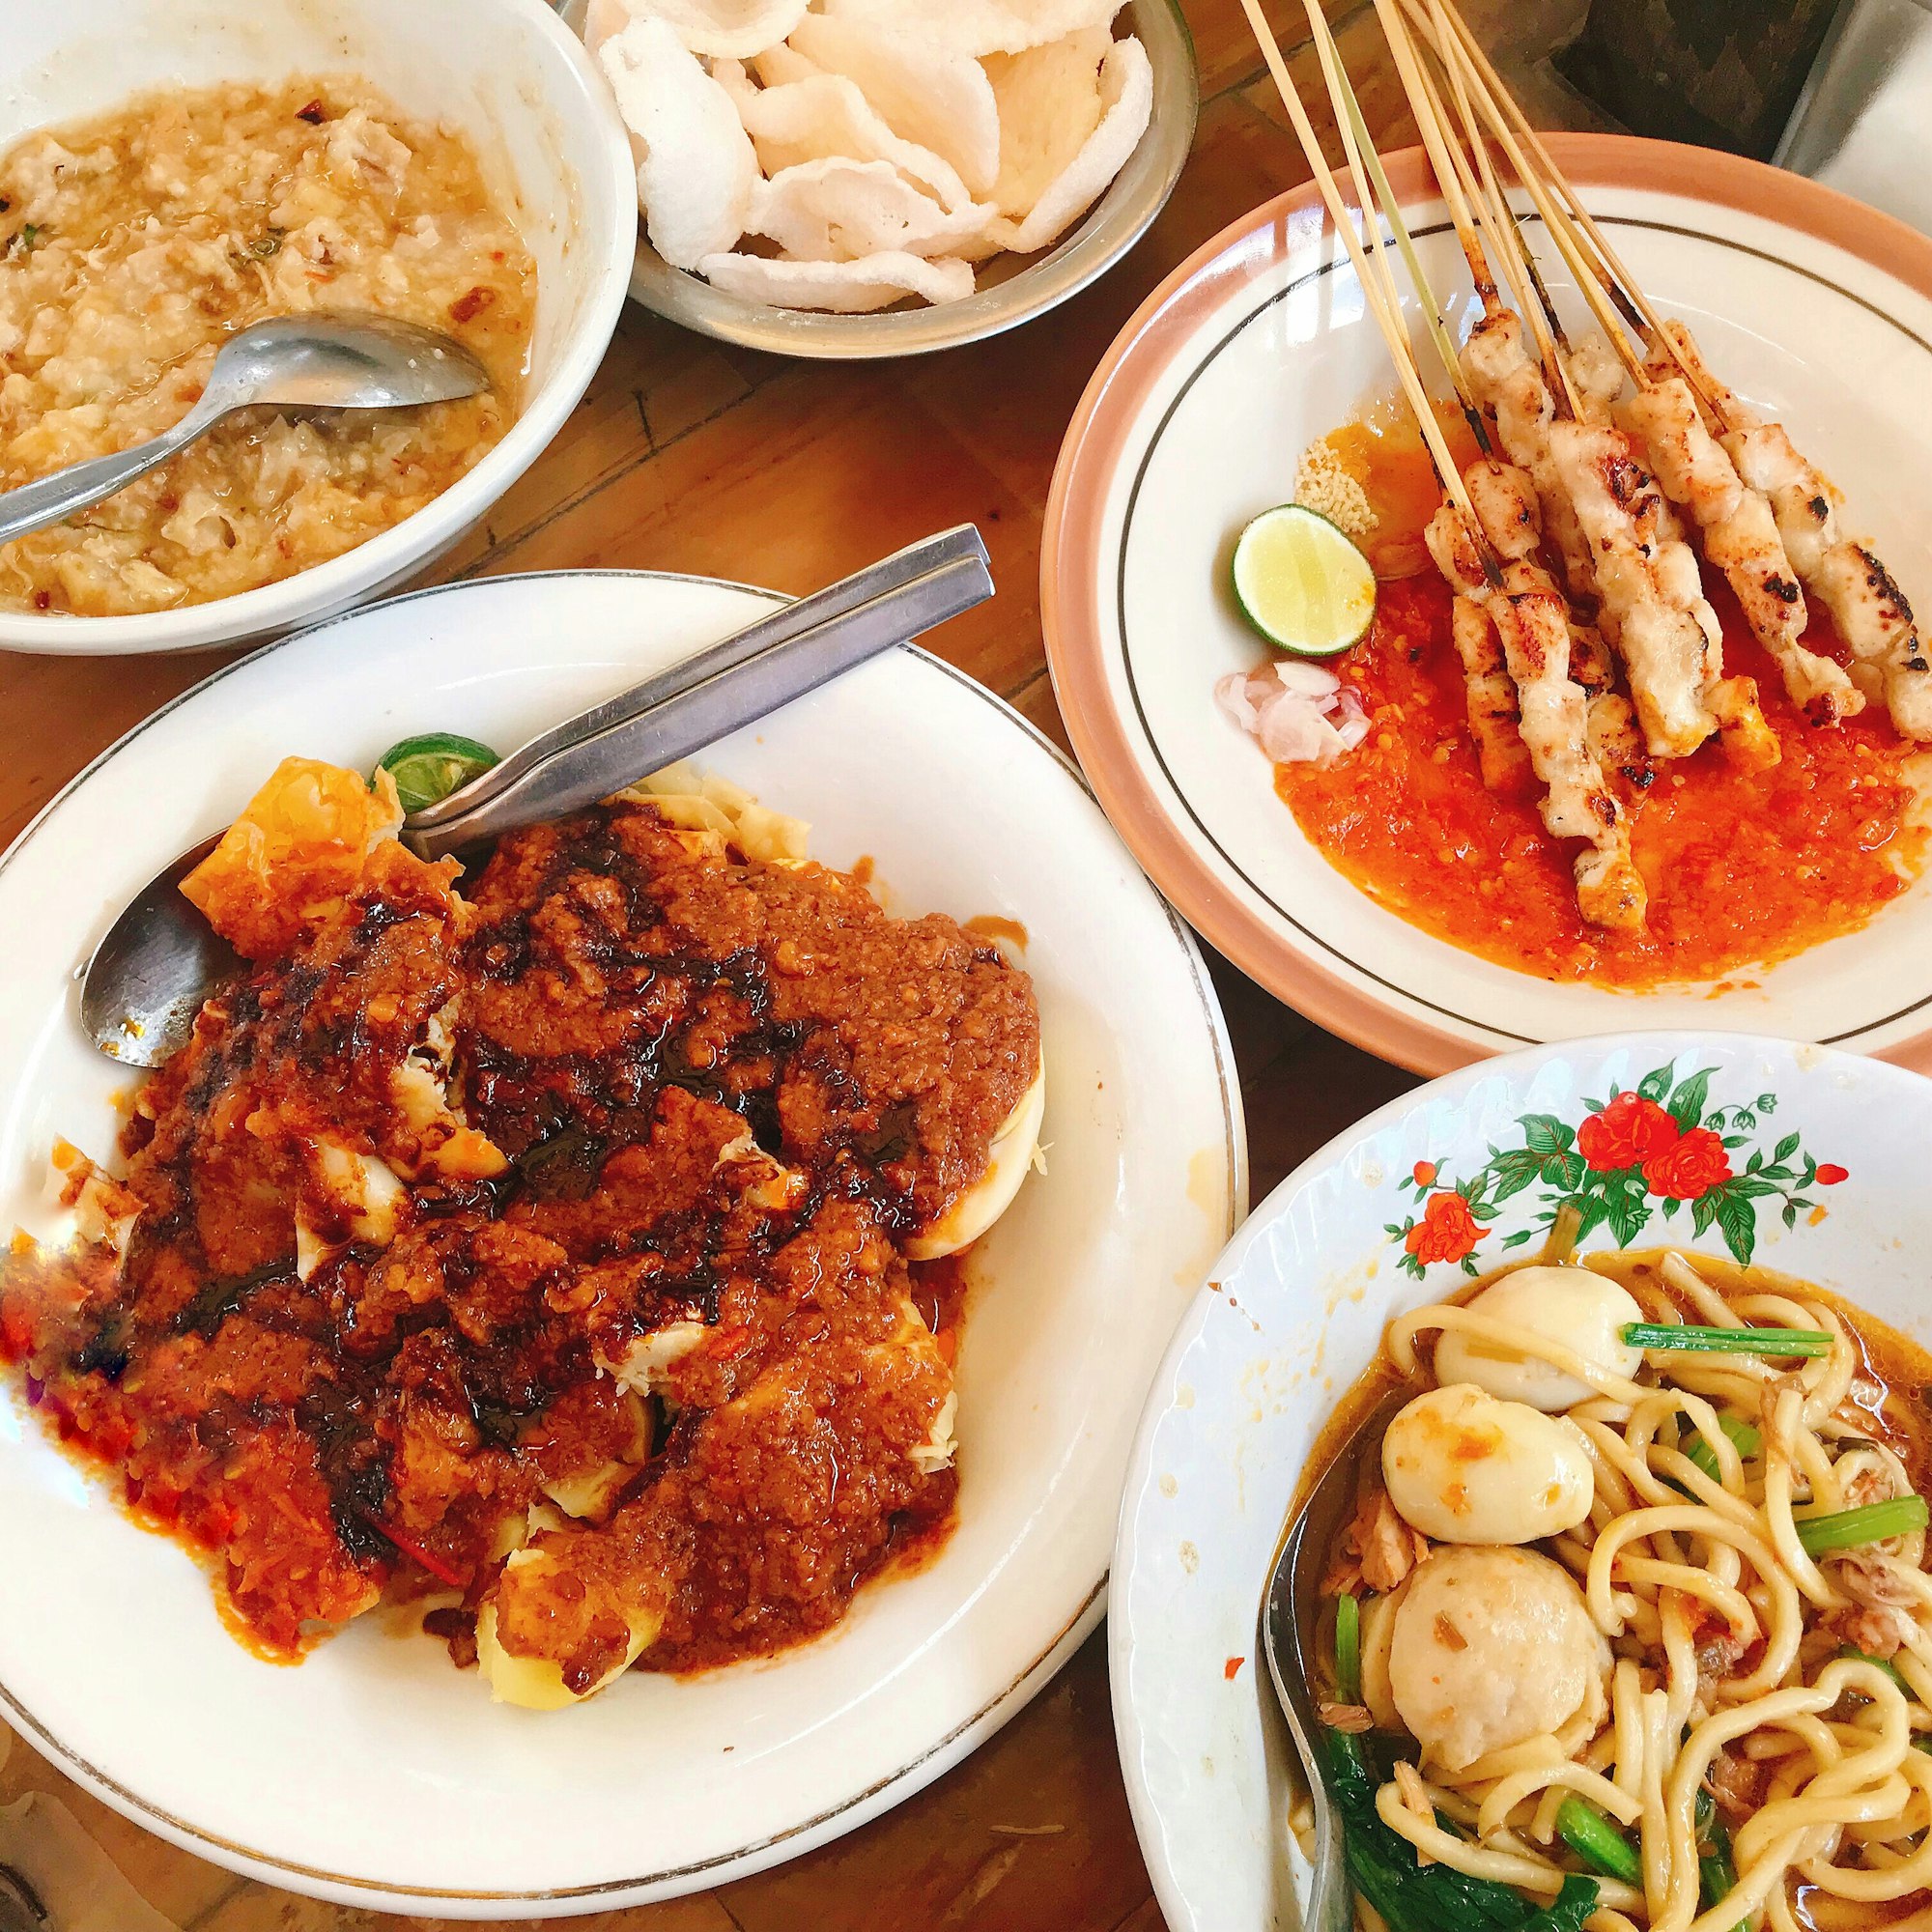 Some of Indonesia's Comfort Foods. You guys should give it a try.